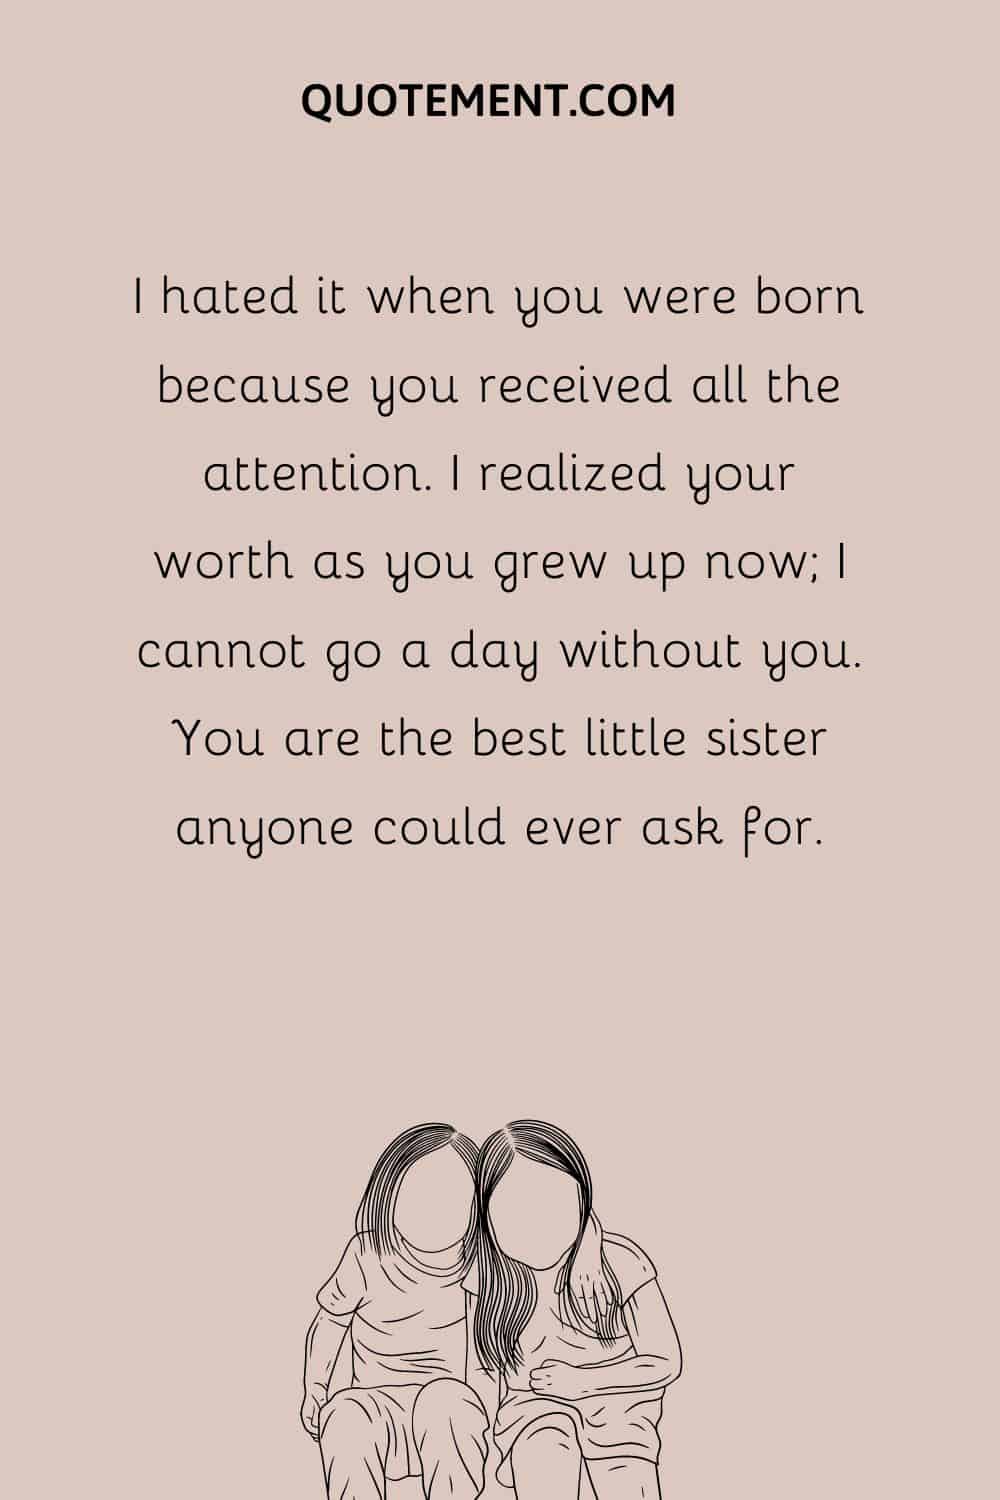 I hated it when you were born because you received all the attention. I realized your worth as you grew up now; I cannot go a day without you. You are the best little sister anyone could ever ask for.